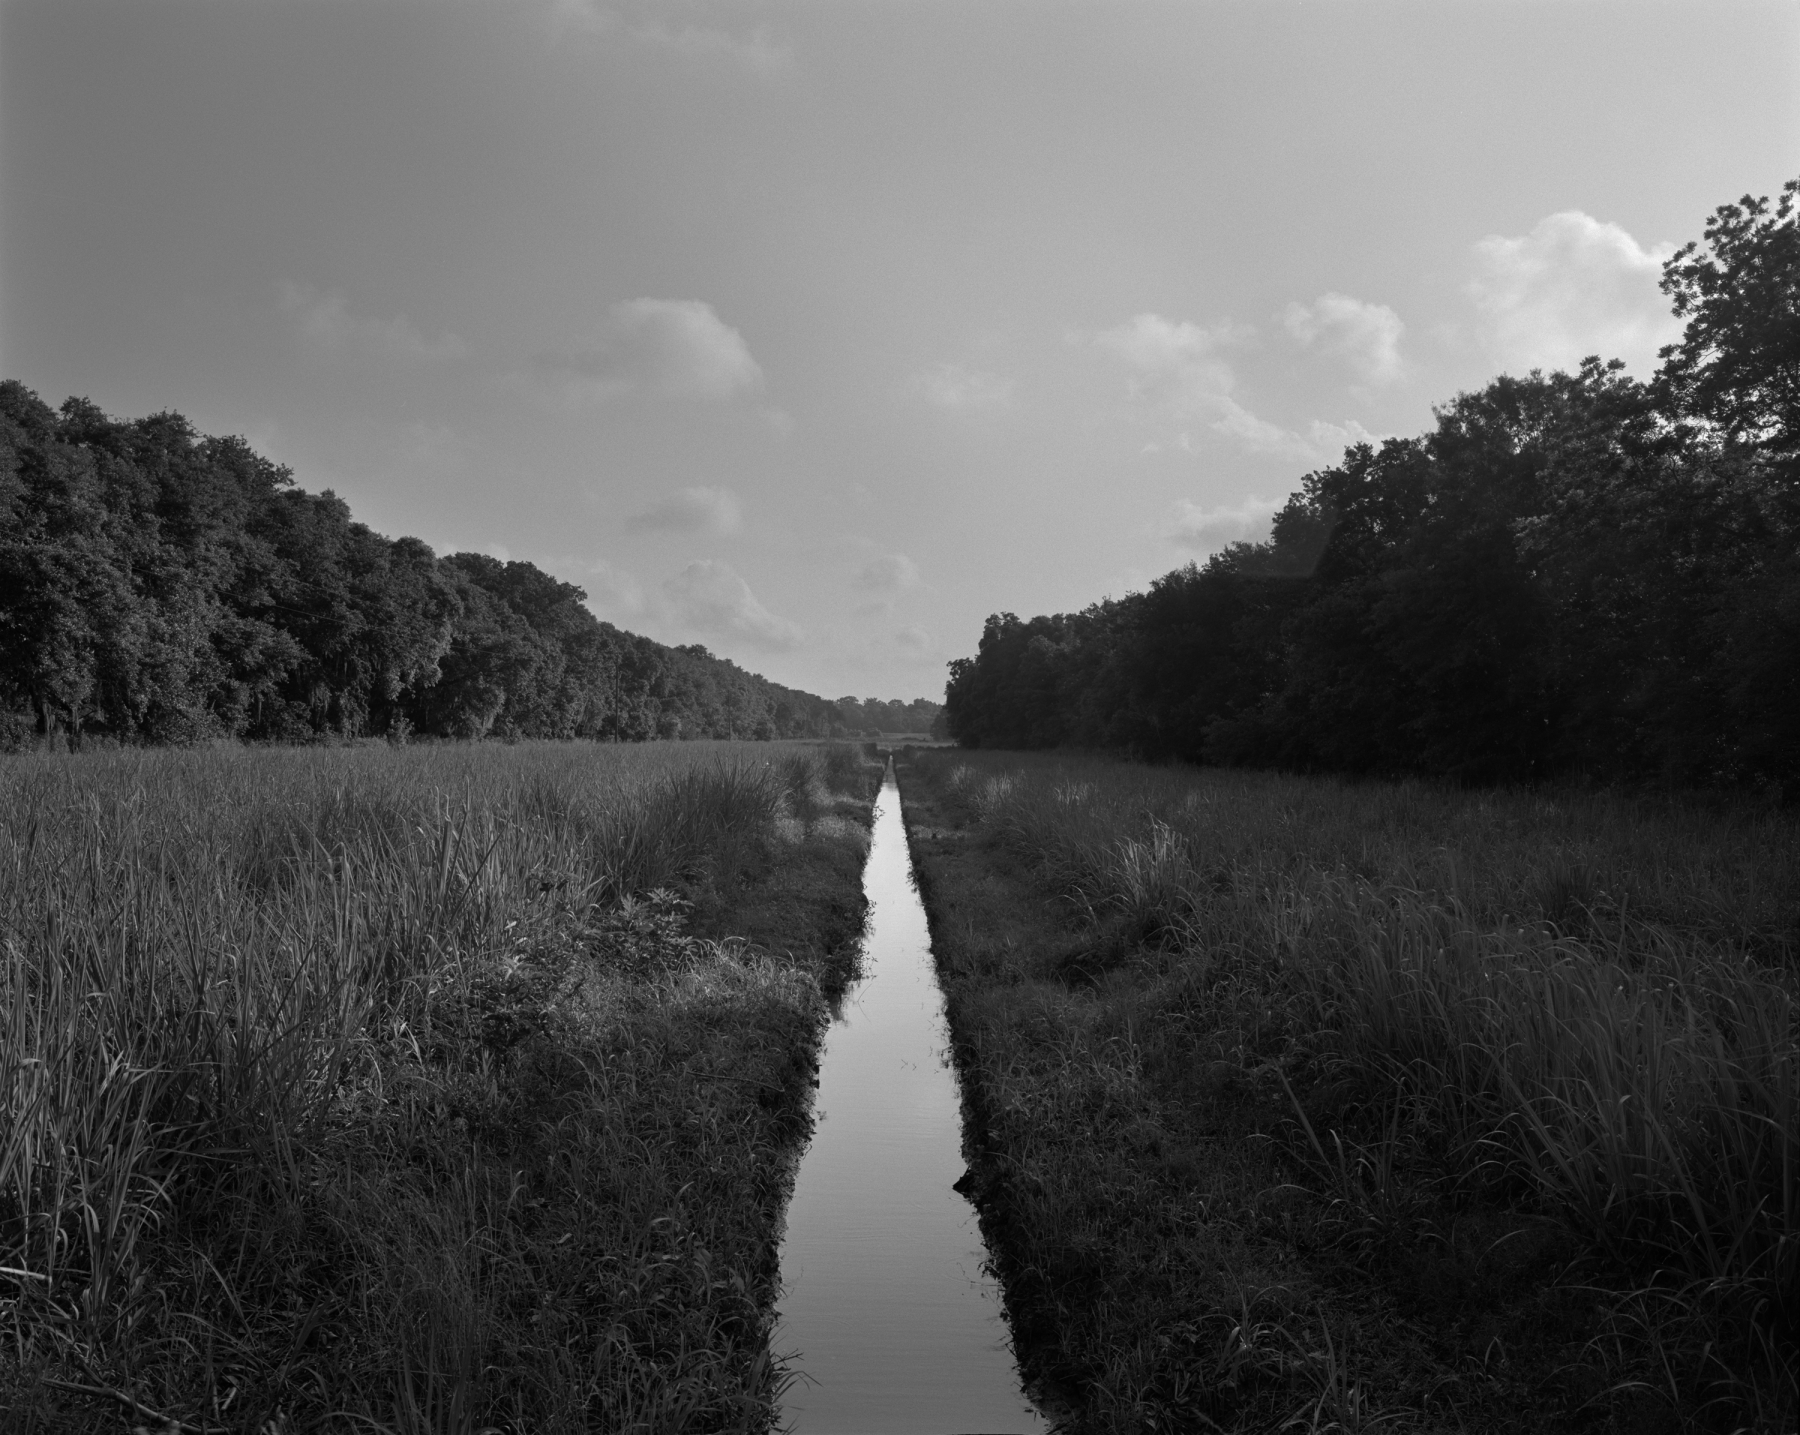 Irrigation Ditch, 2019
gelatin silver print
framed: 49 x 60 x 2 inches (124.5 x 152.4 x 5.1 cm)
edition of 6 with 2 APs&nbsp;
(DB-ITHP.19.23.3)